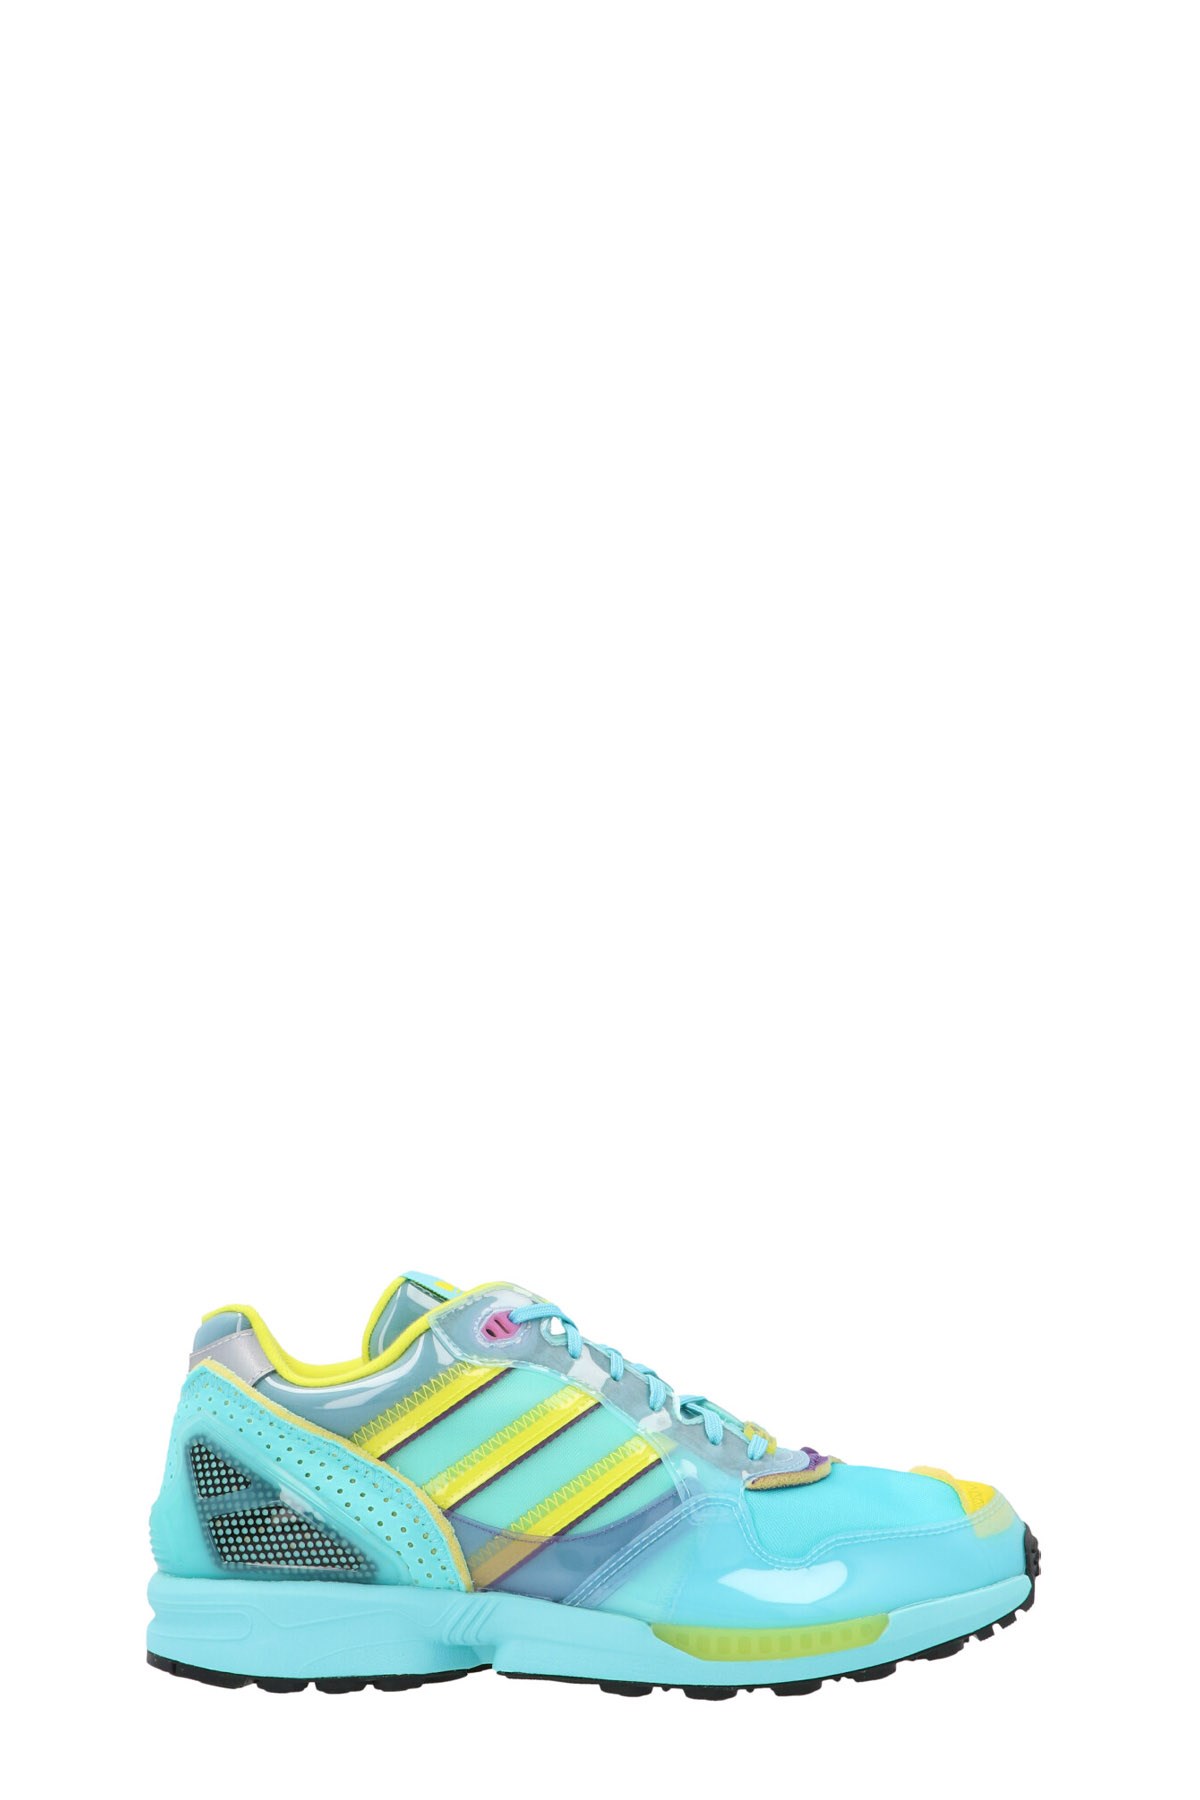 ADIDAS STATEMENT Xz 0006 Inside Out' Capsule Energy Pack Sneakers '